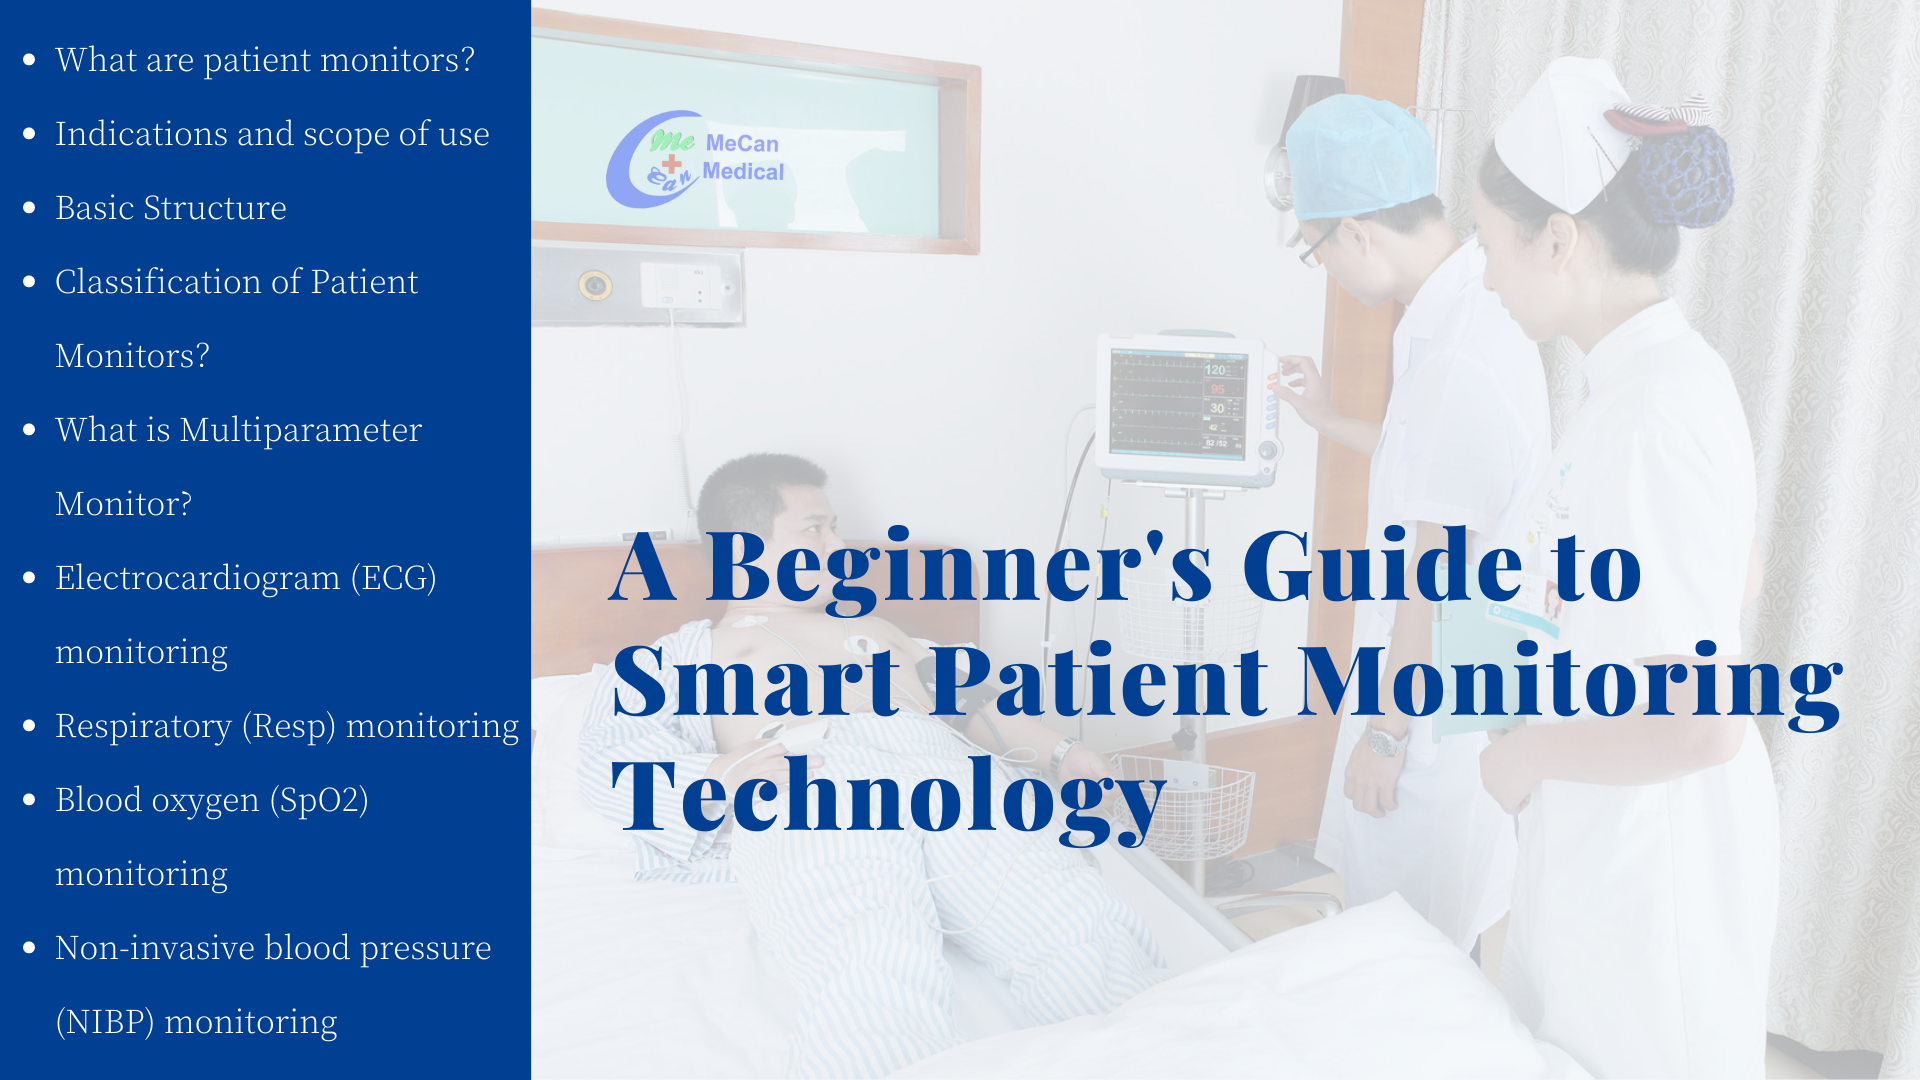 A Beginner's Guide to Smart Patient Monitoring Technology